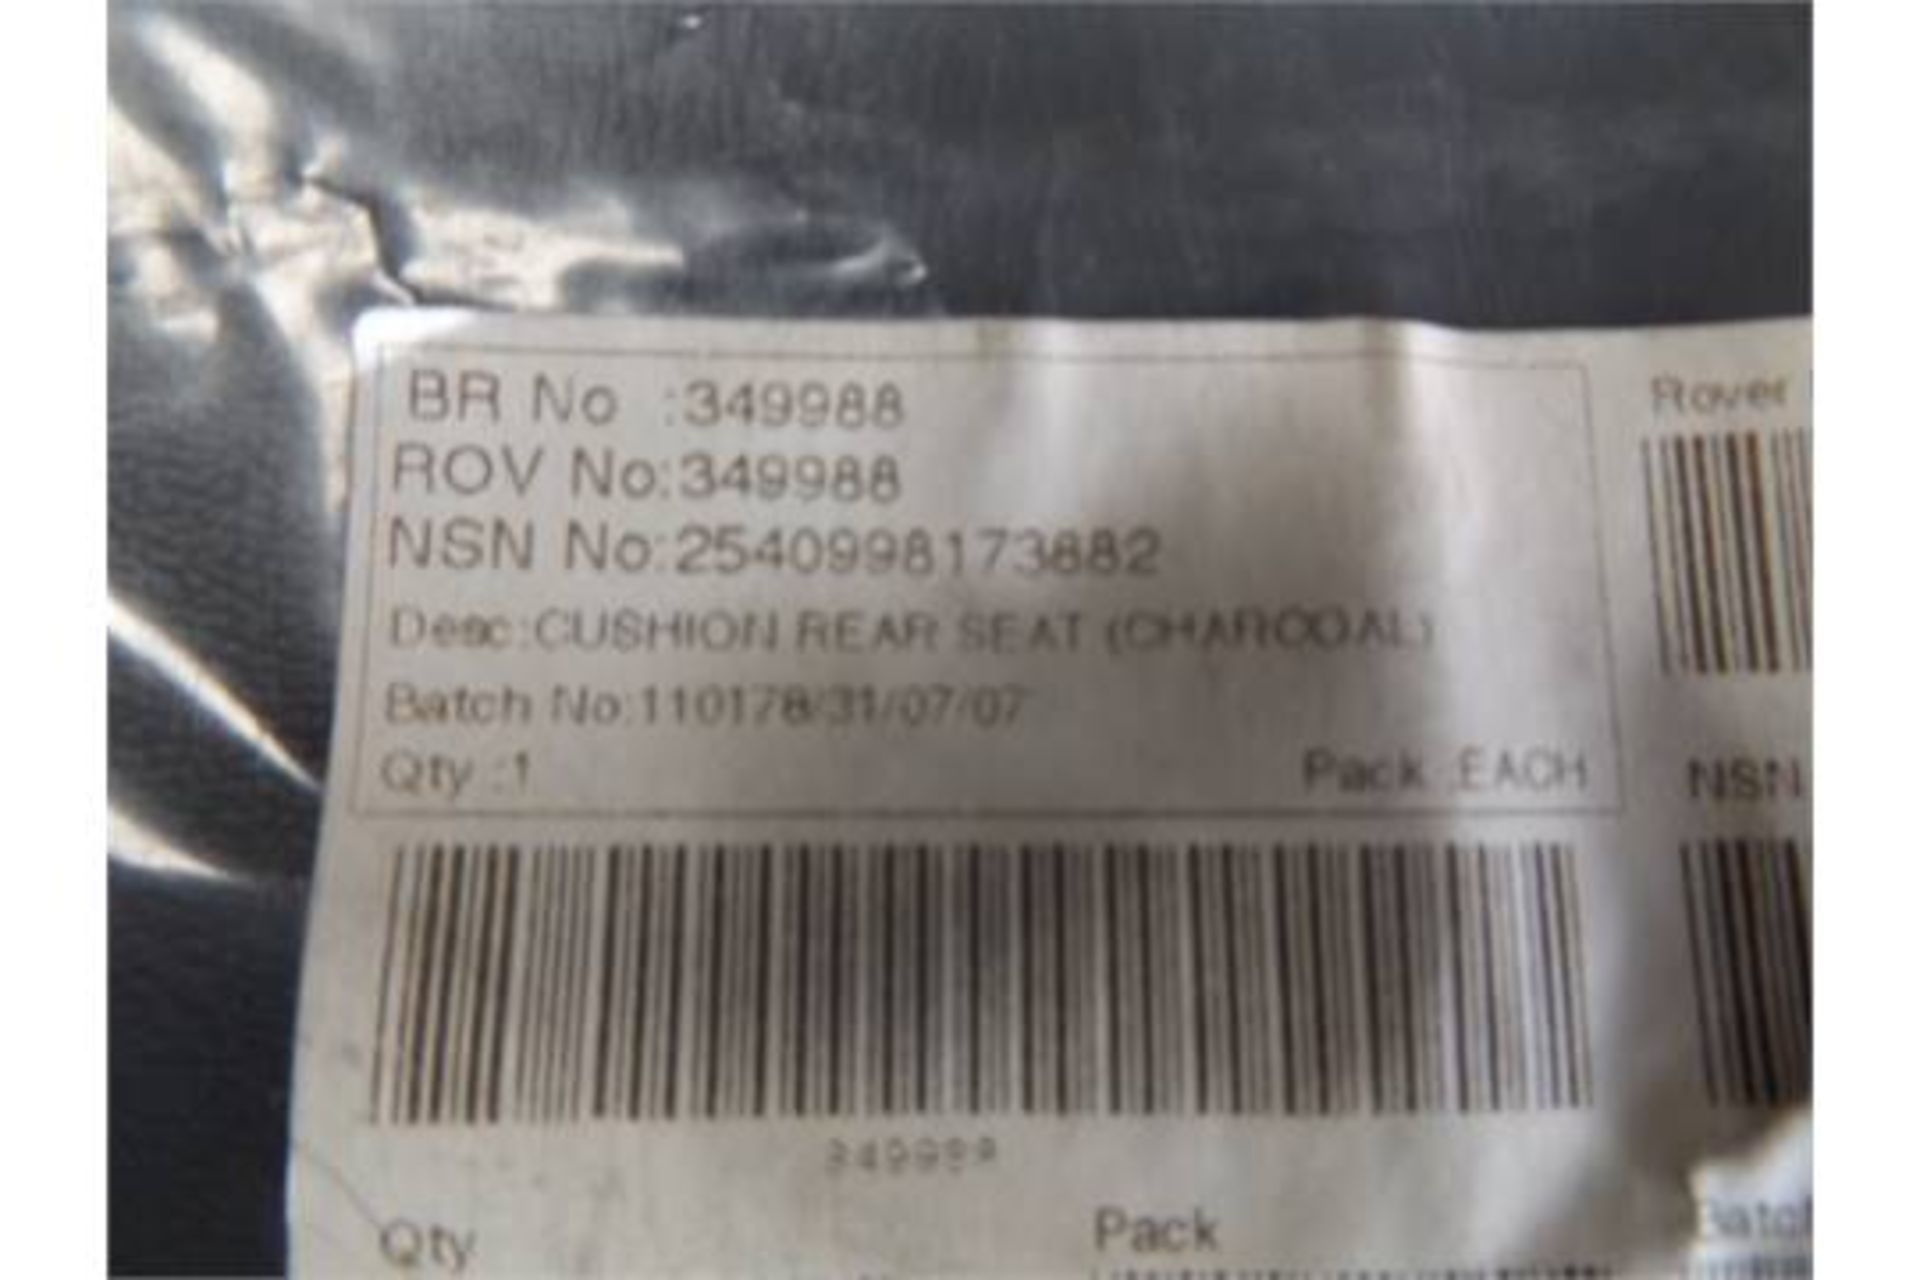 4 x Land Rover Rear Seat Cushions Charcoal P/No 349988 - Image 5 of 5